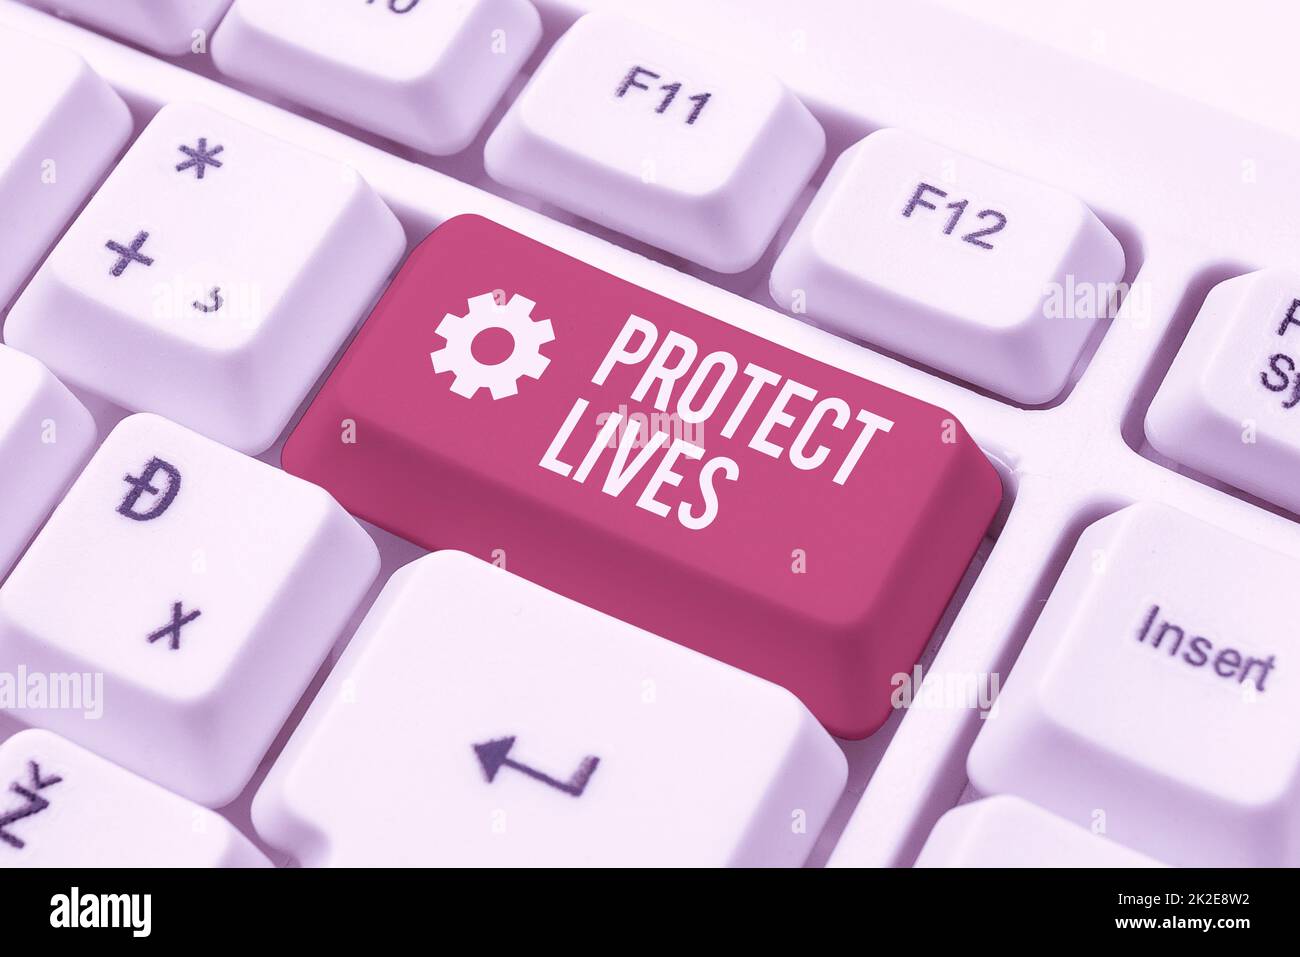 Handwriting text Protect Lives. Word Written on to cover or shield from exposure injury damage or destruction Abstract Presenting Ethical Hacker, Typing Creative Notes And Ideas Stock Photo